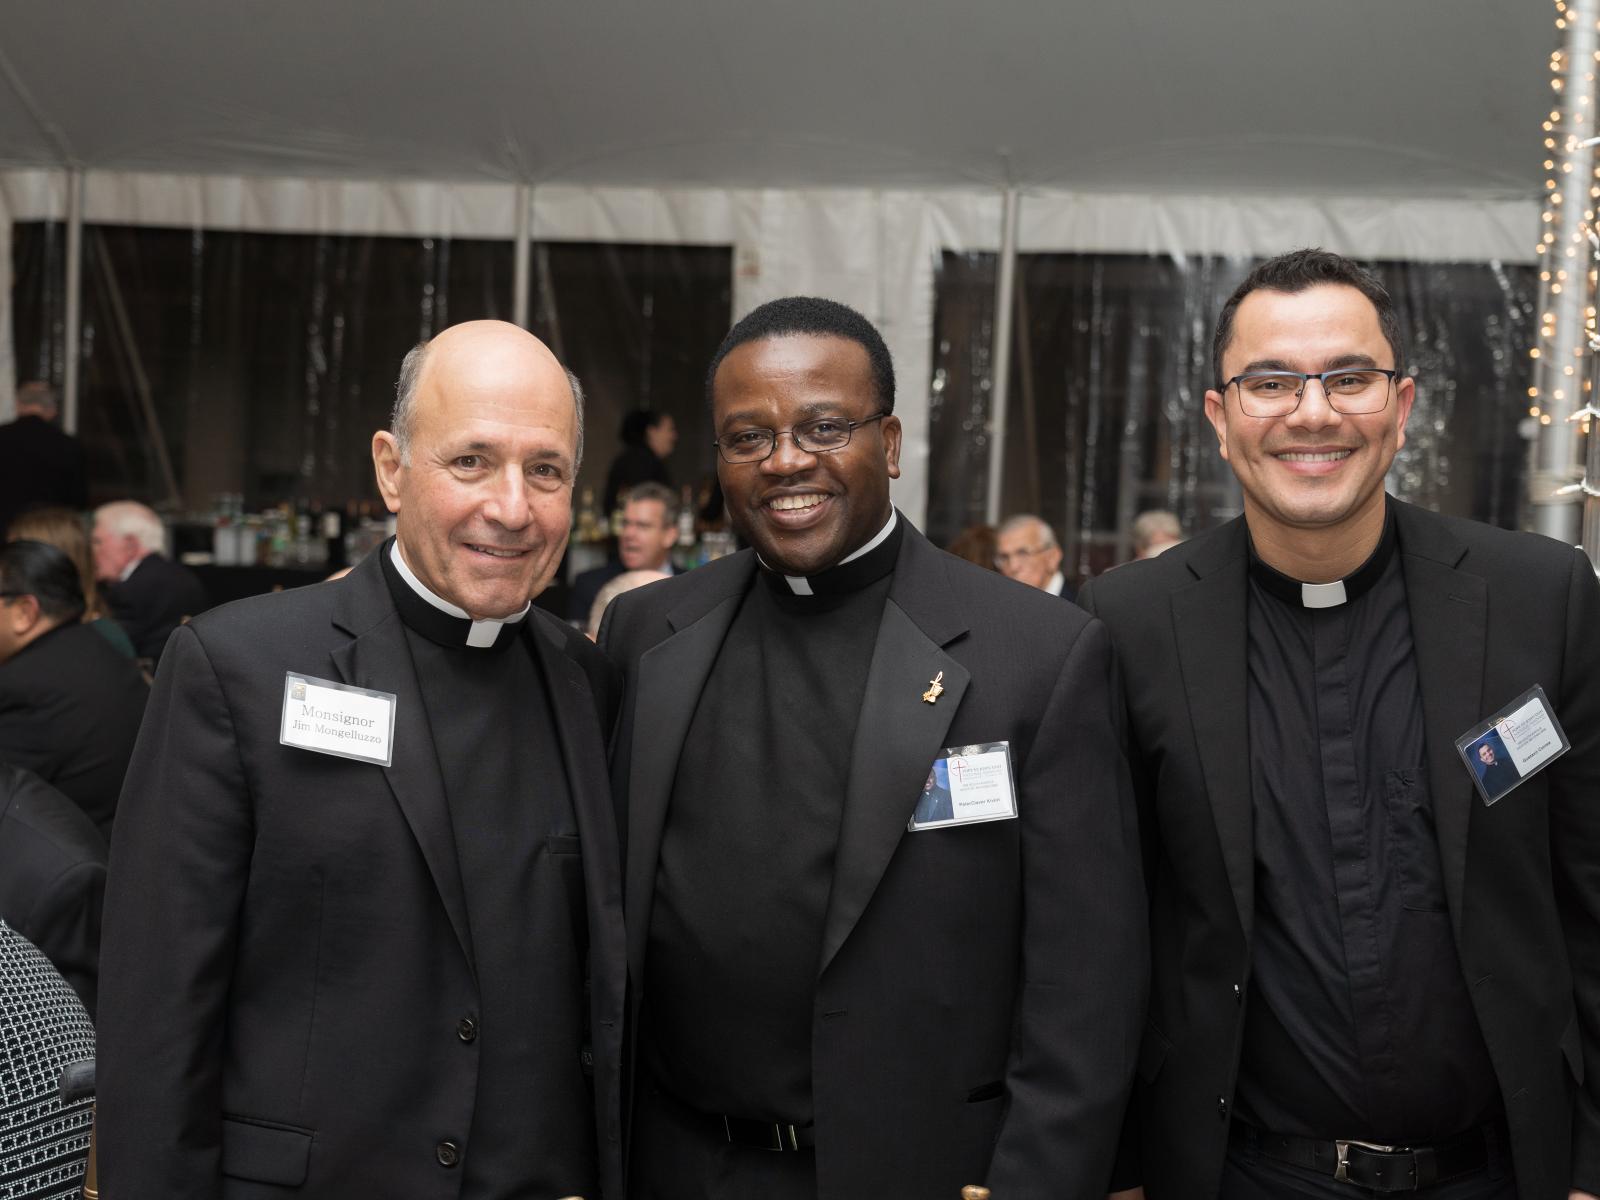 41st Annual Lawn Party Raises $350,000 for Priestly Formation 27